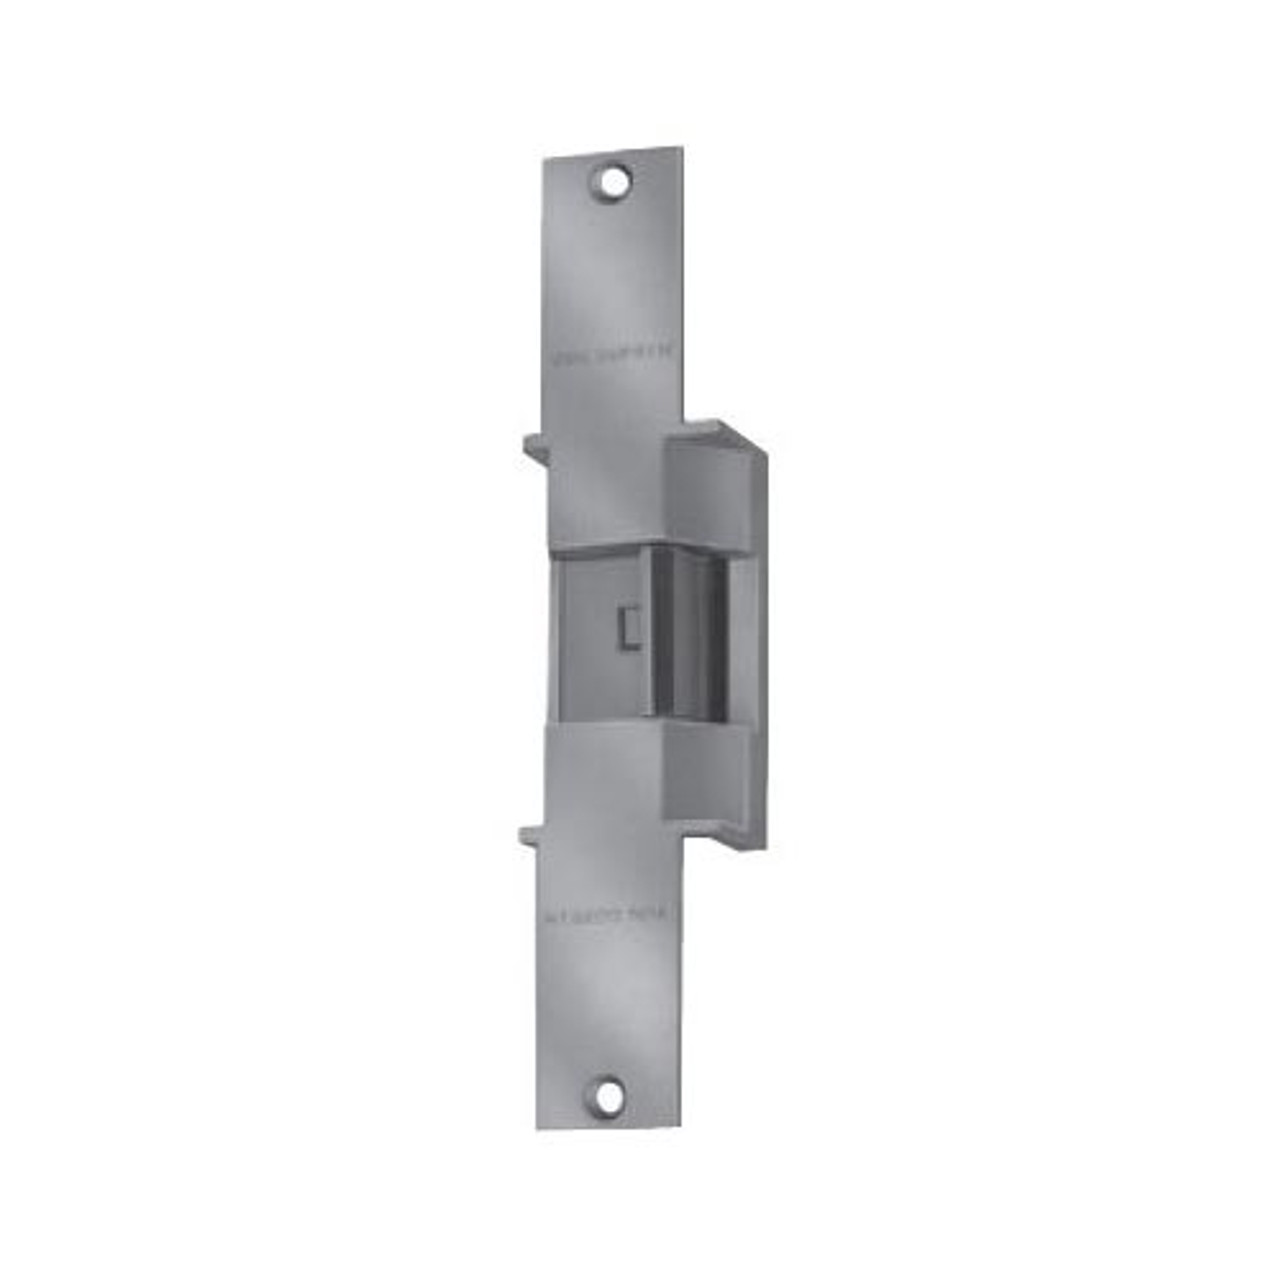 6214-DS-12VDC-US32D Von Duprin Electric Strike in Satin Stainless Steel Finish